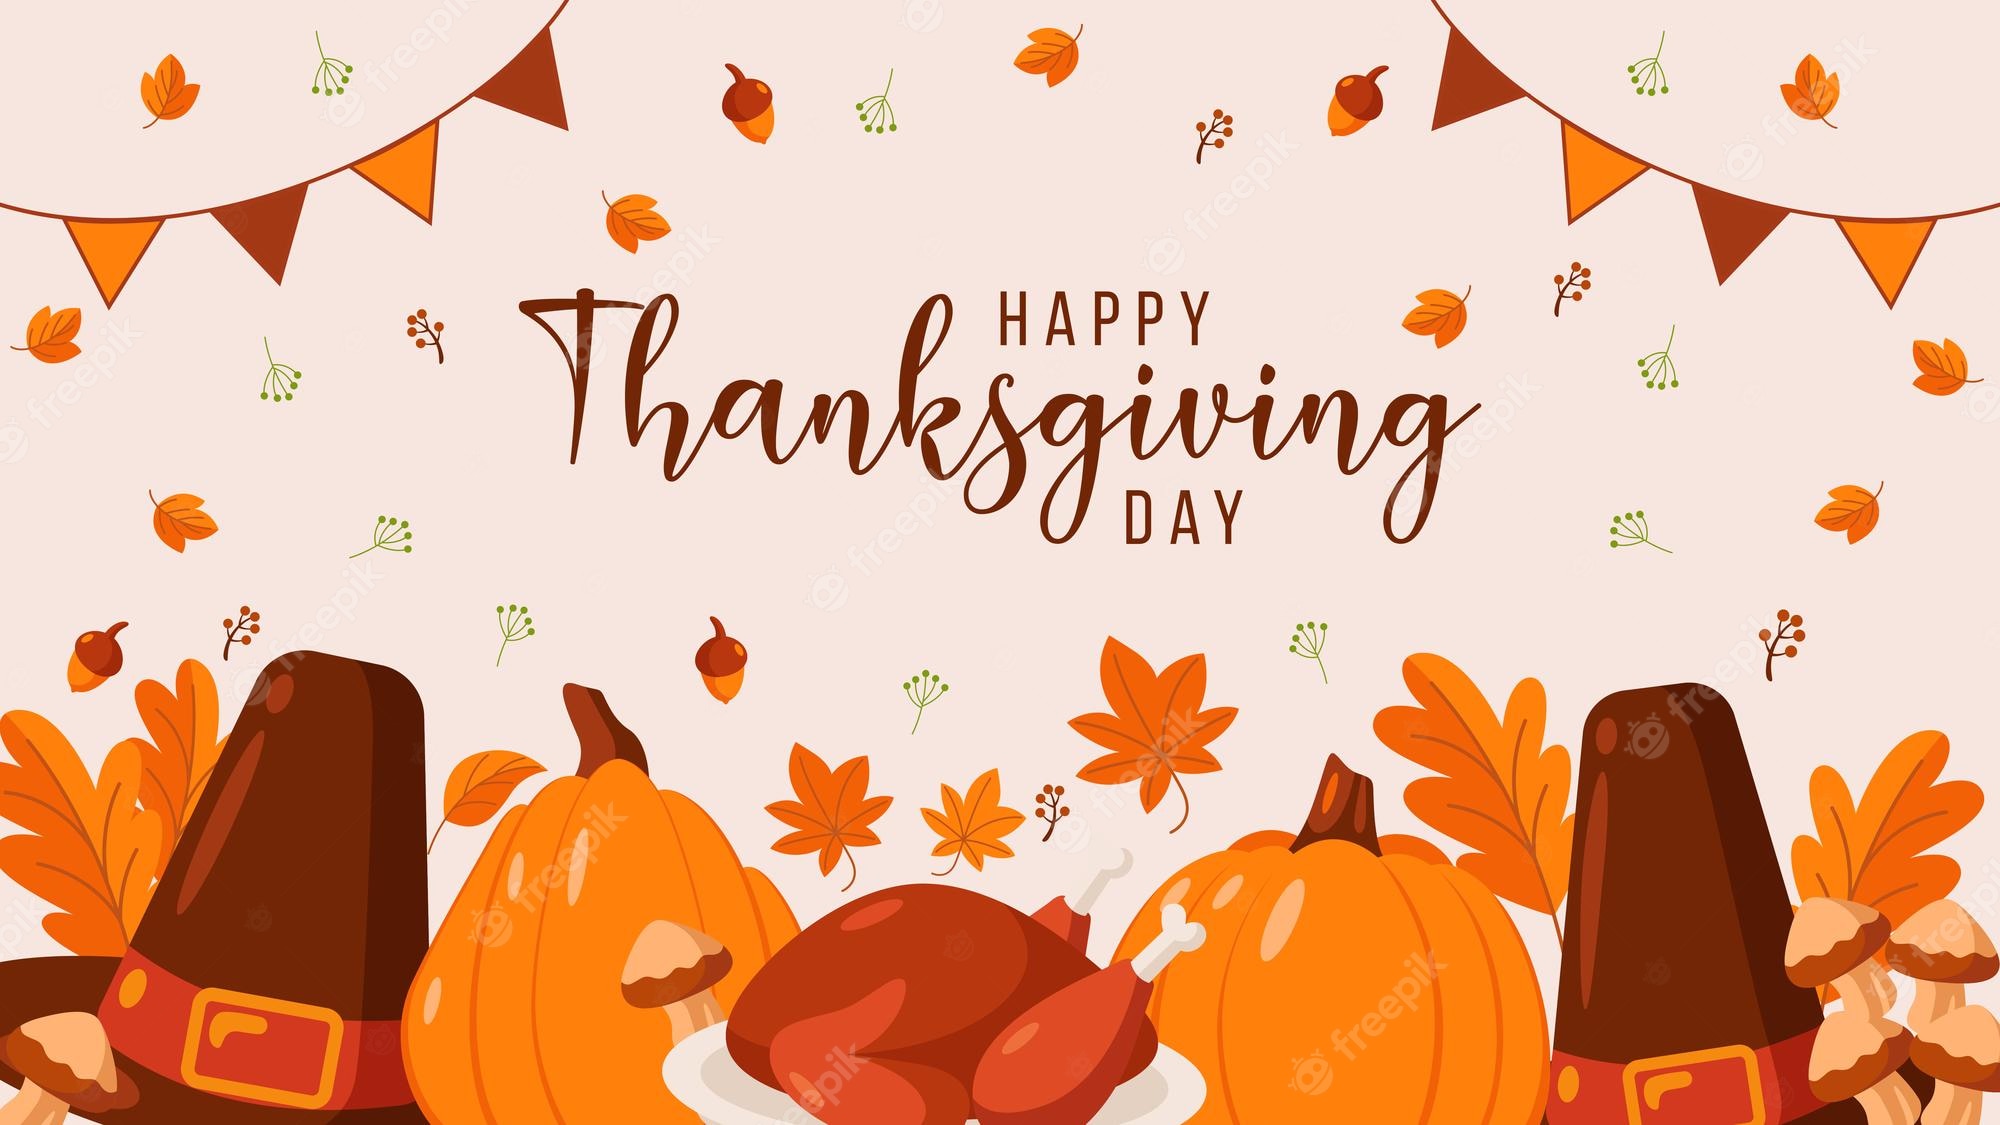 Premium Vector. Happy thanksgiving day background design in flat style illustration